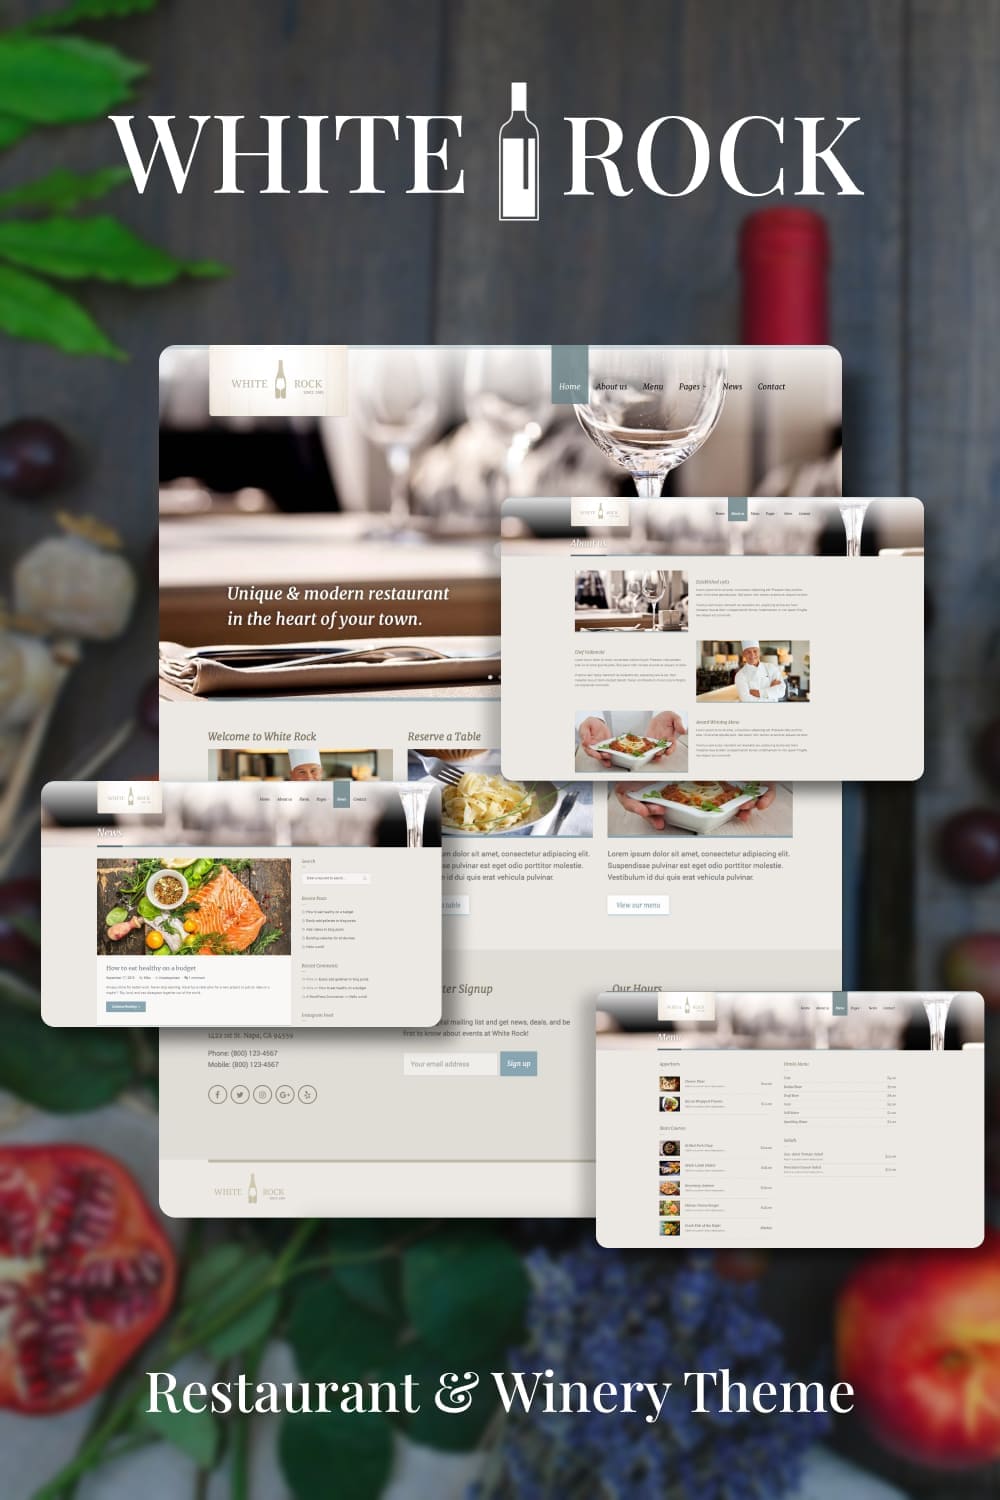 White rock restaurant winery theme, picture for pinterest 1000x1500.